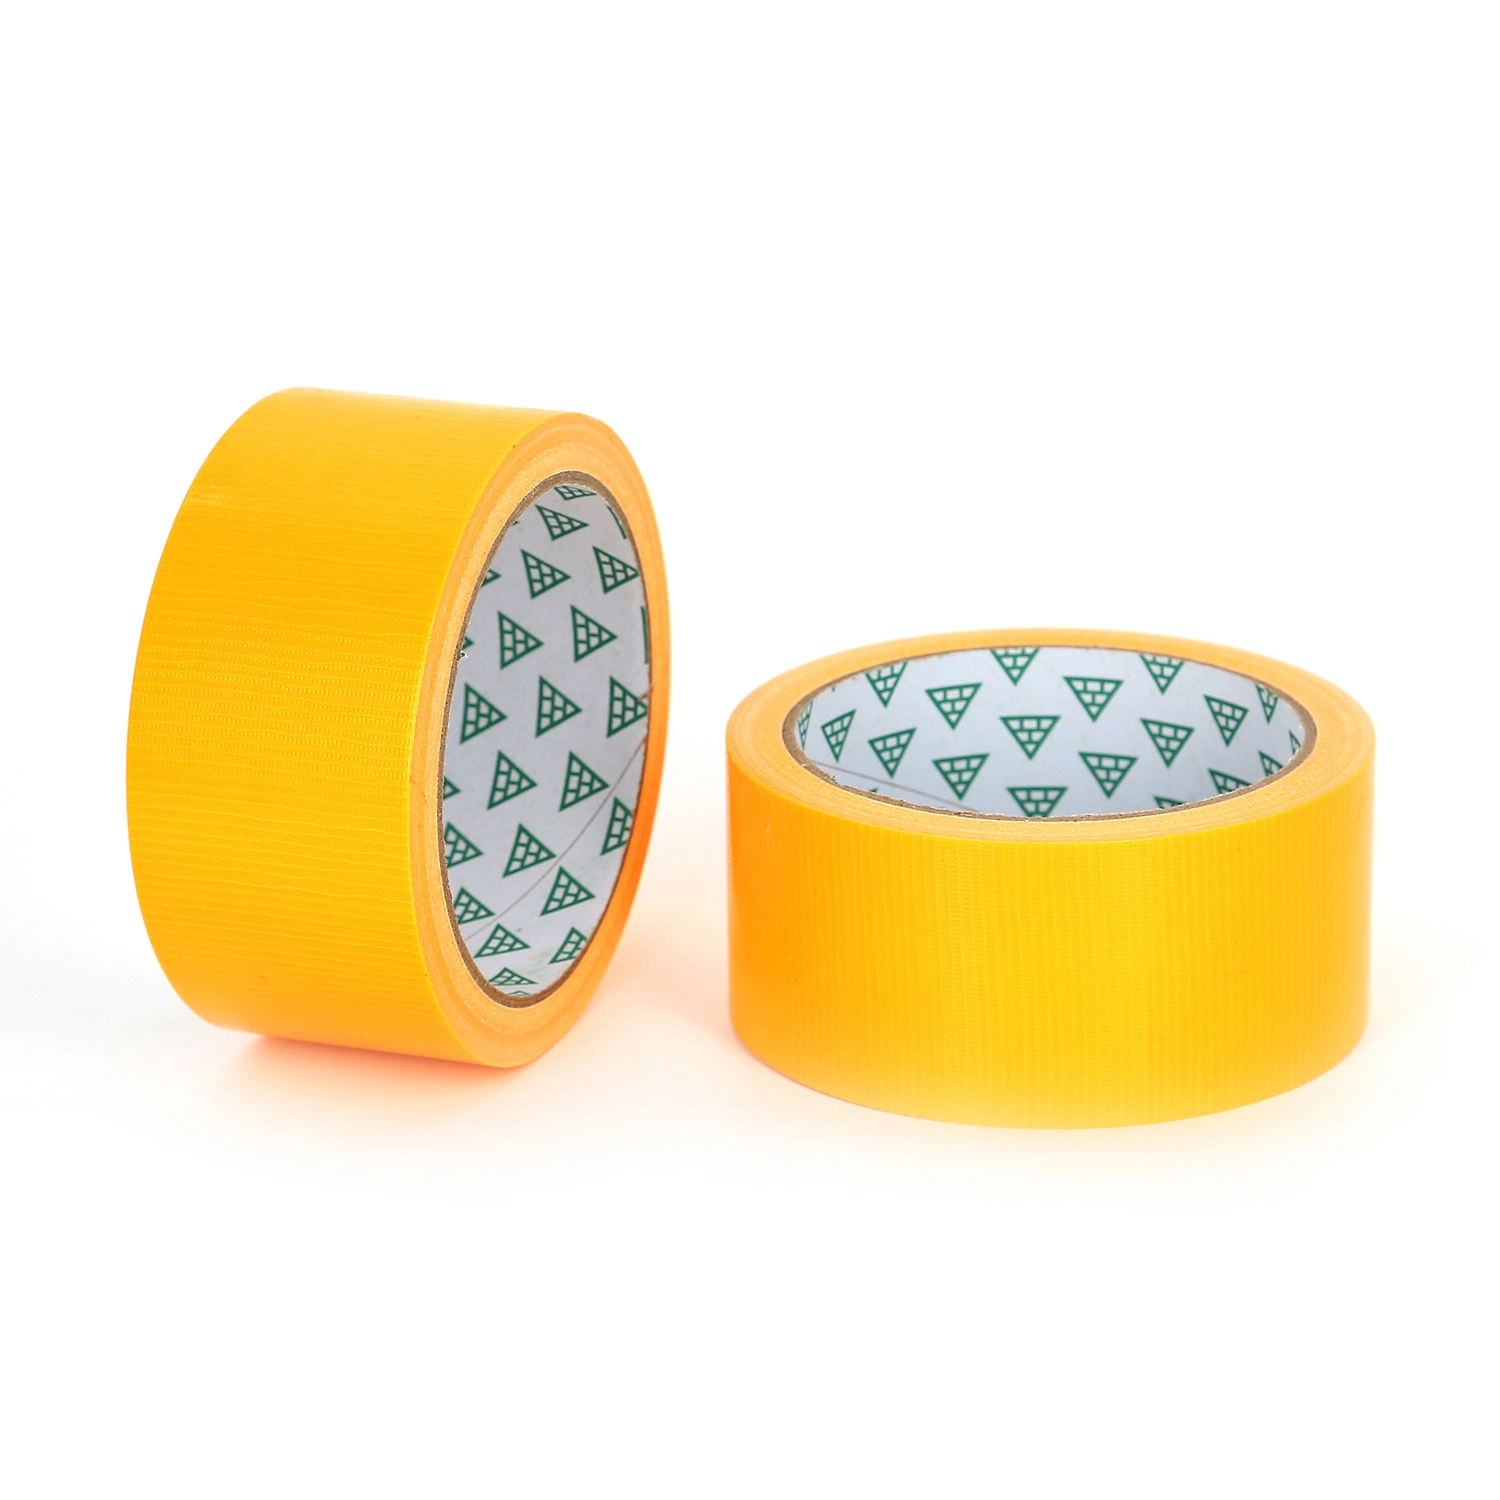 Cheap Price Automotive High Temperature Car Painter Colored Crepe Paper Masking Tape Car Painting Masking Adhesive Tape ODM